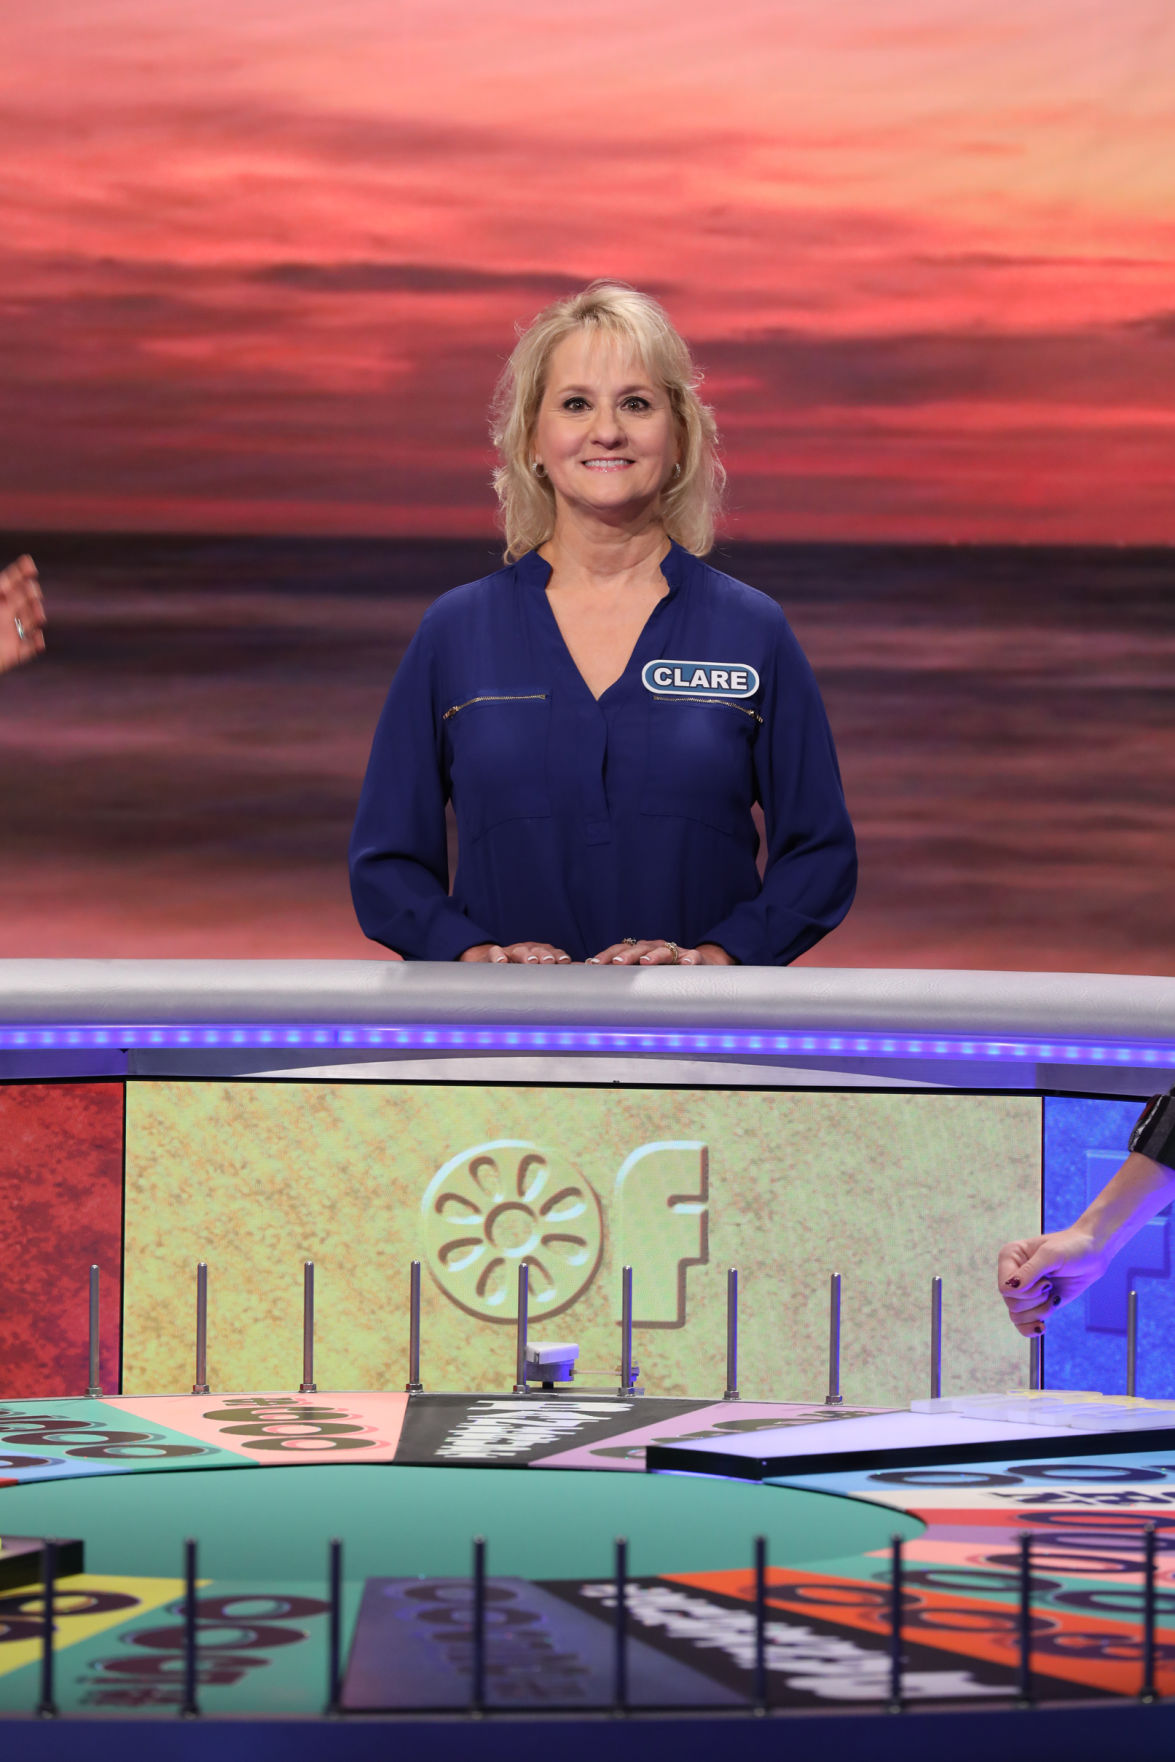 College Station Aggie lands 'Wheel of Fortune' spot | Local News | theeagle.com